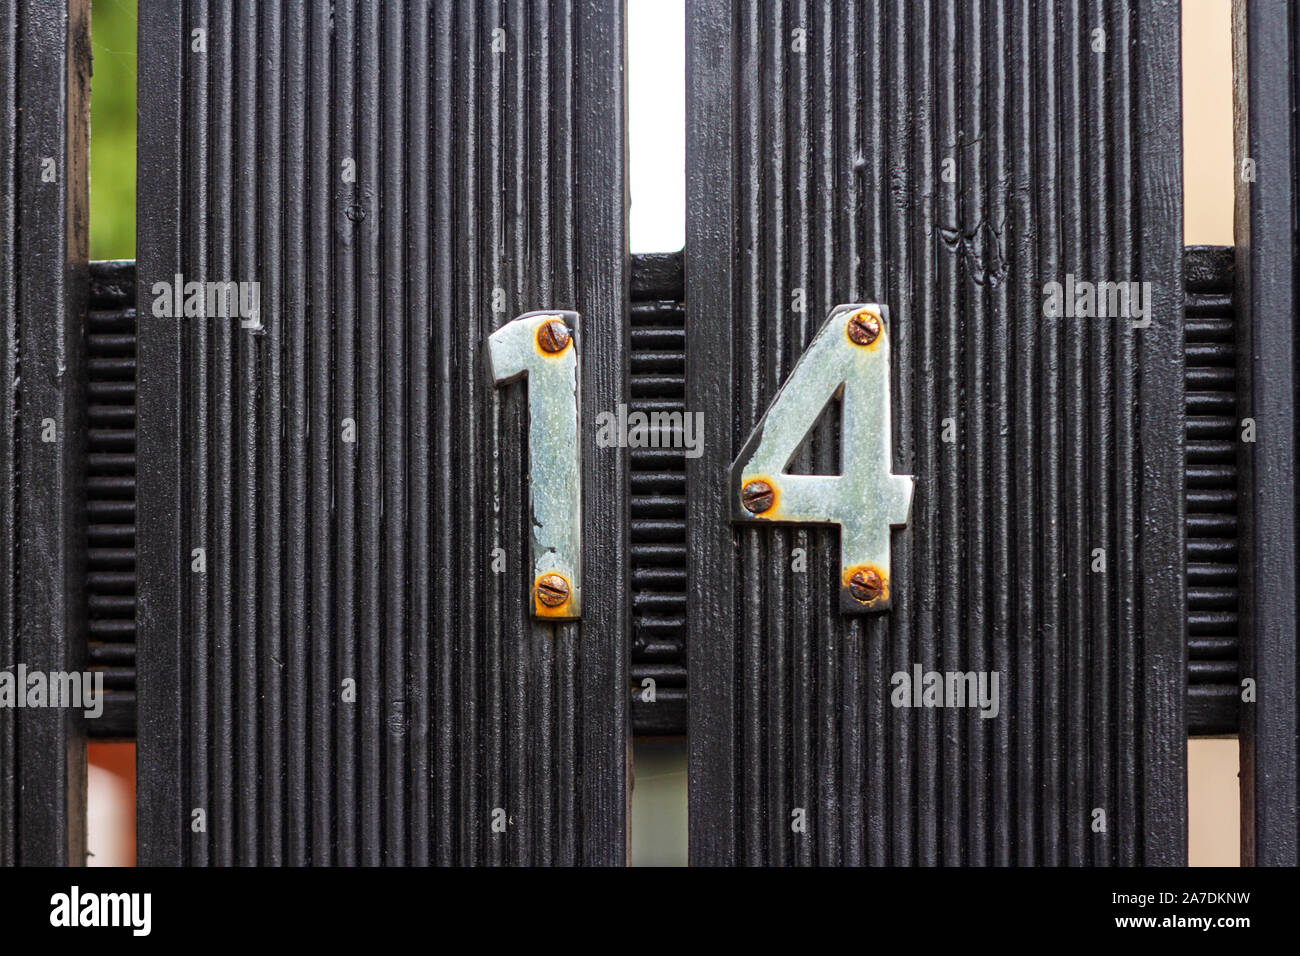 Rusty house number 14 on a black wooden gate with lines Stock Photo